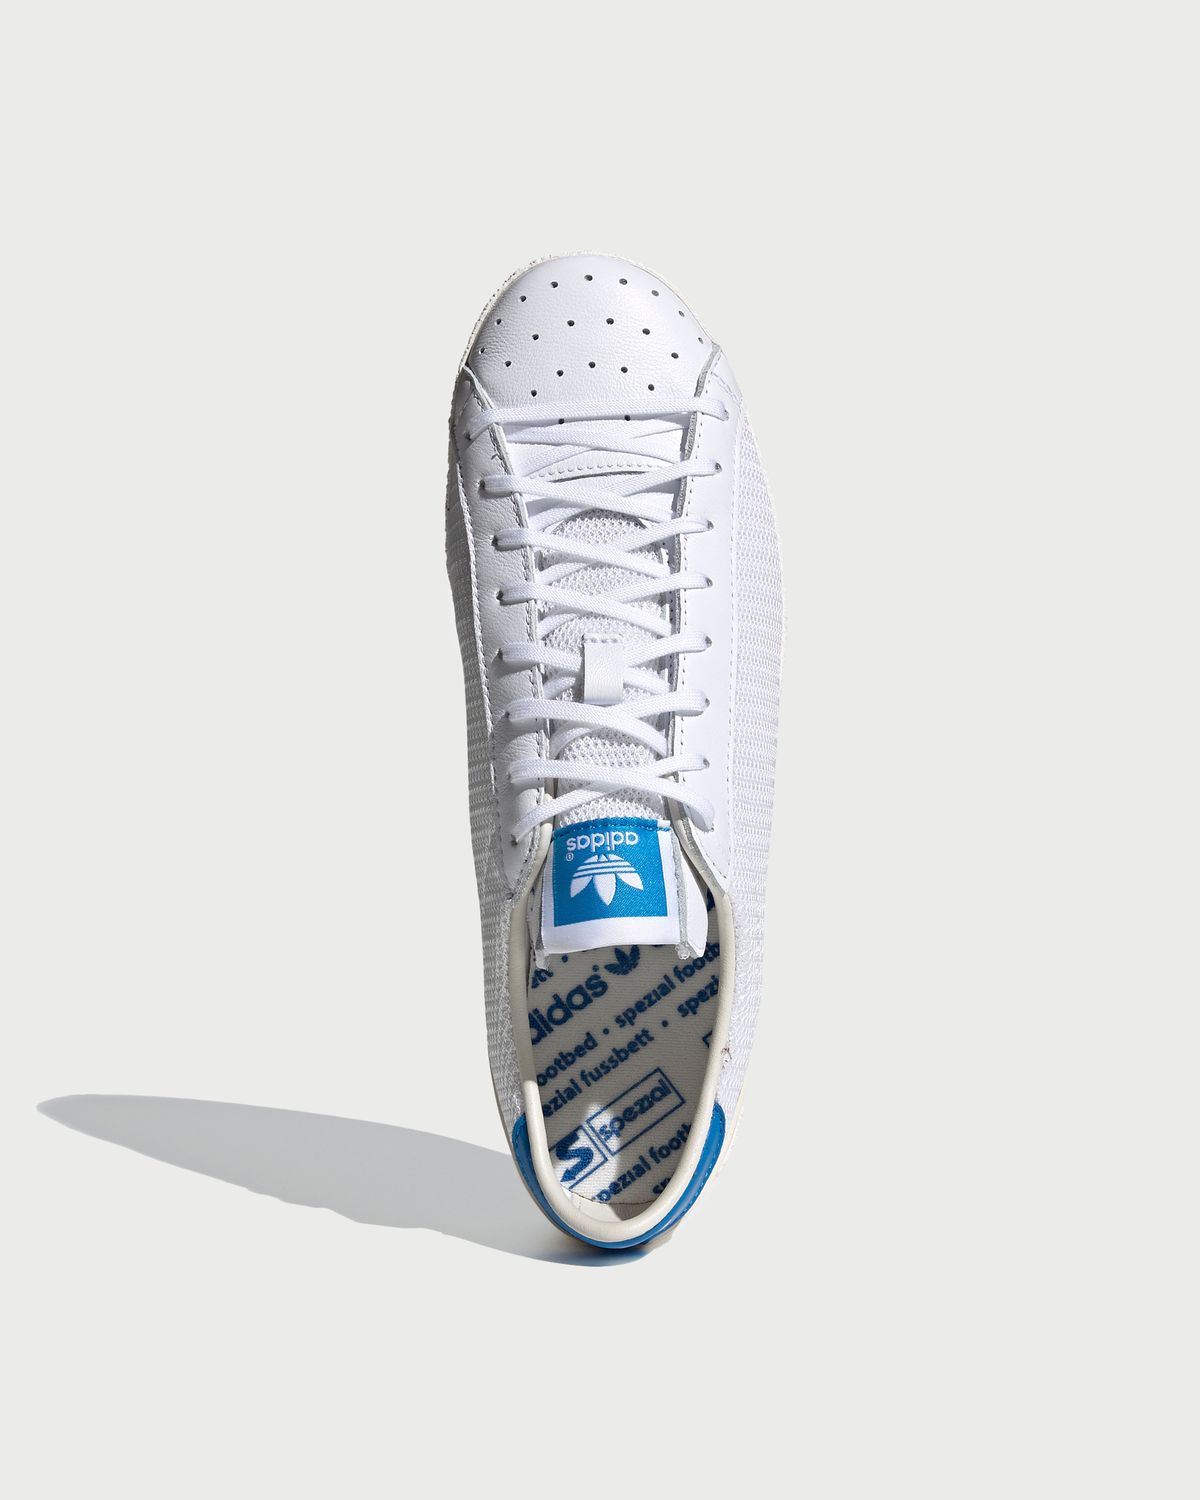 Adidas – Aderley Spezial Off White - Low Top Sneakers - White - Image 3